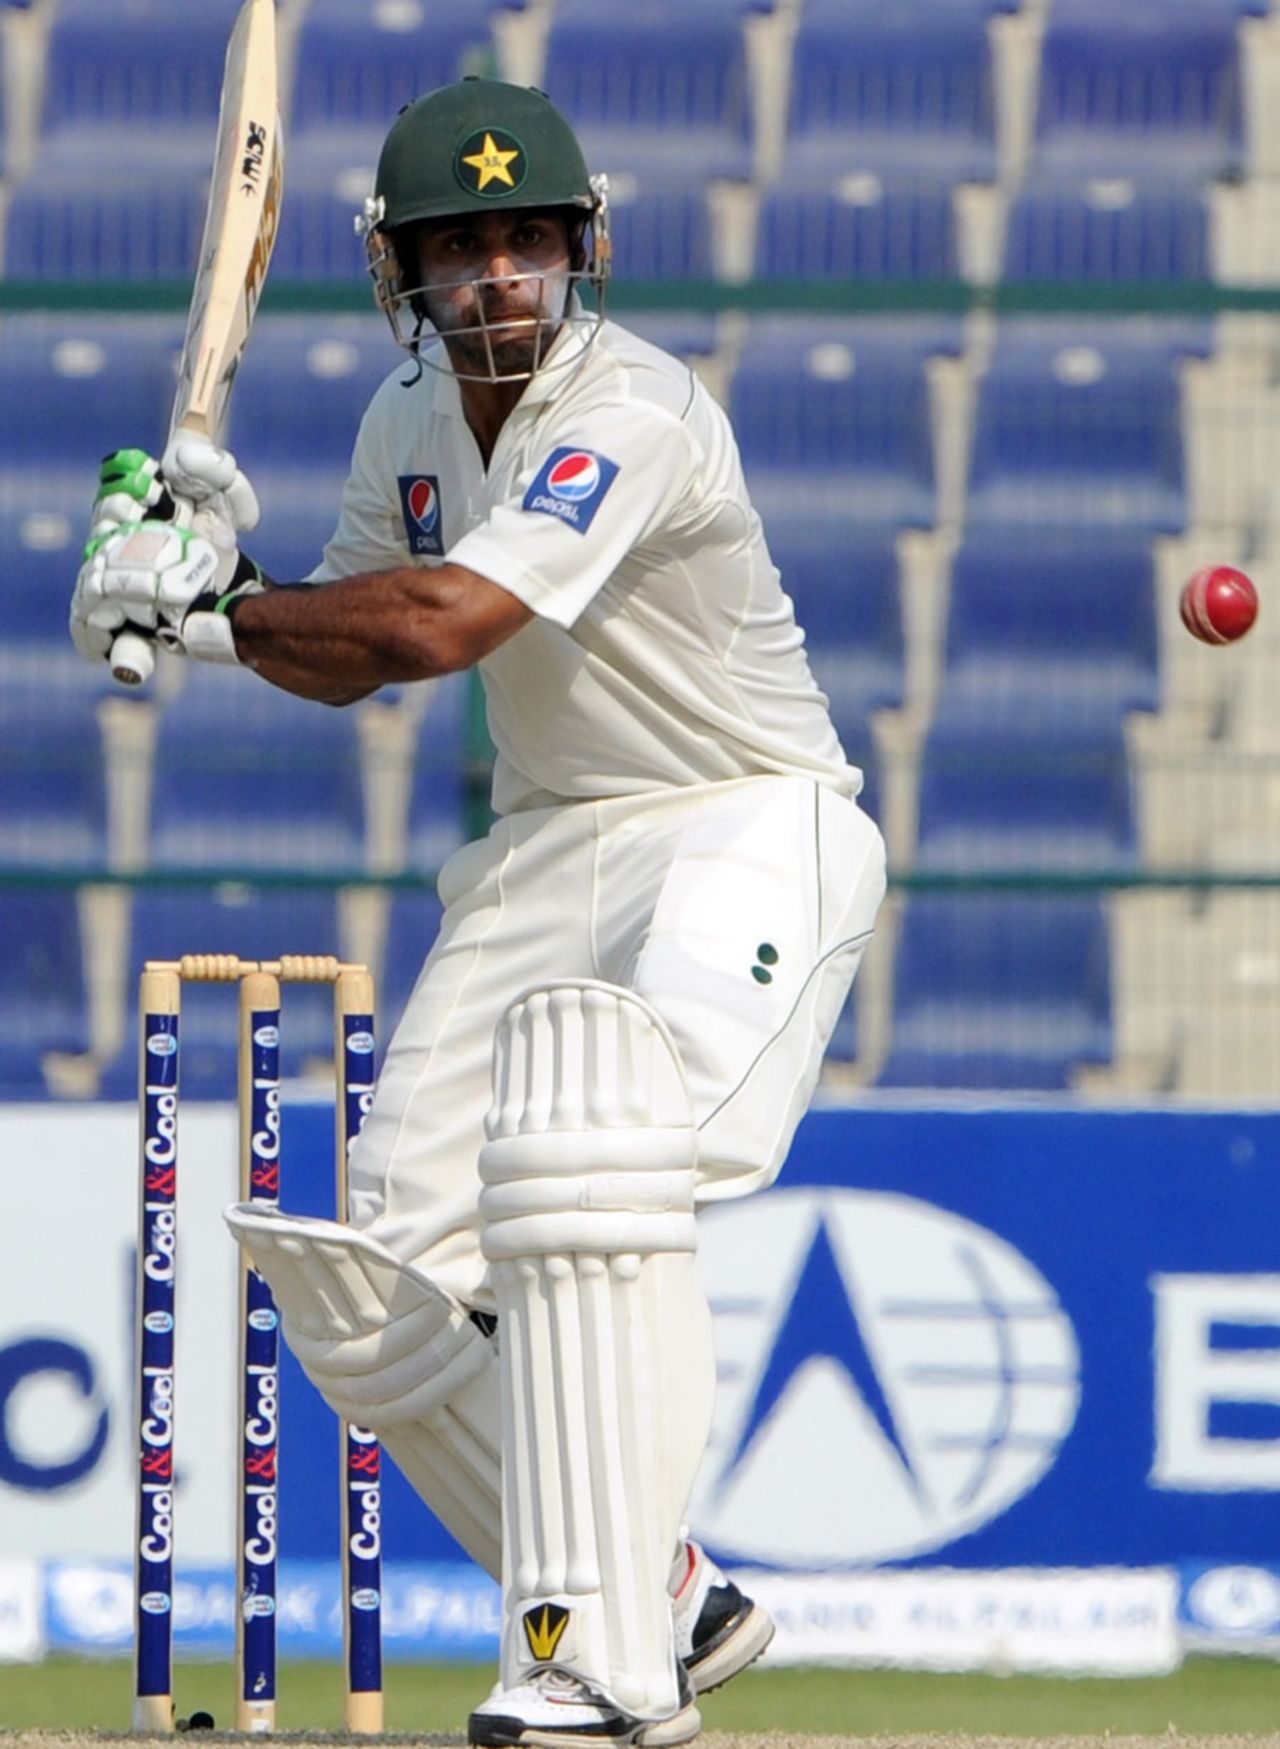 Mohammad Hafeez helped Pakistan make a solid start, Pakistan v South Africa, 2nd Test, Abu Dhabi, 5th day, November 24, 2010